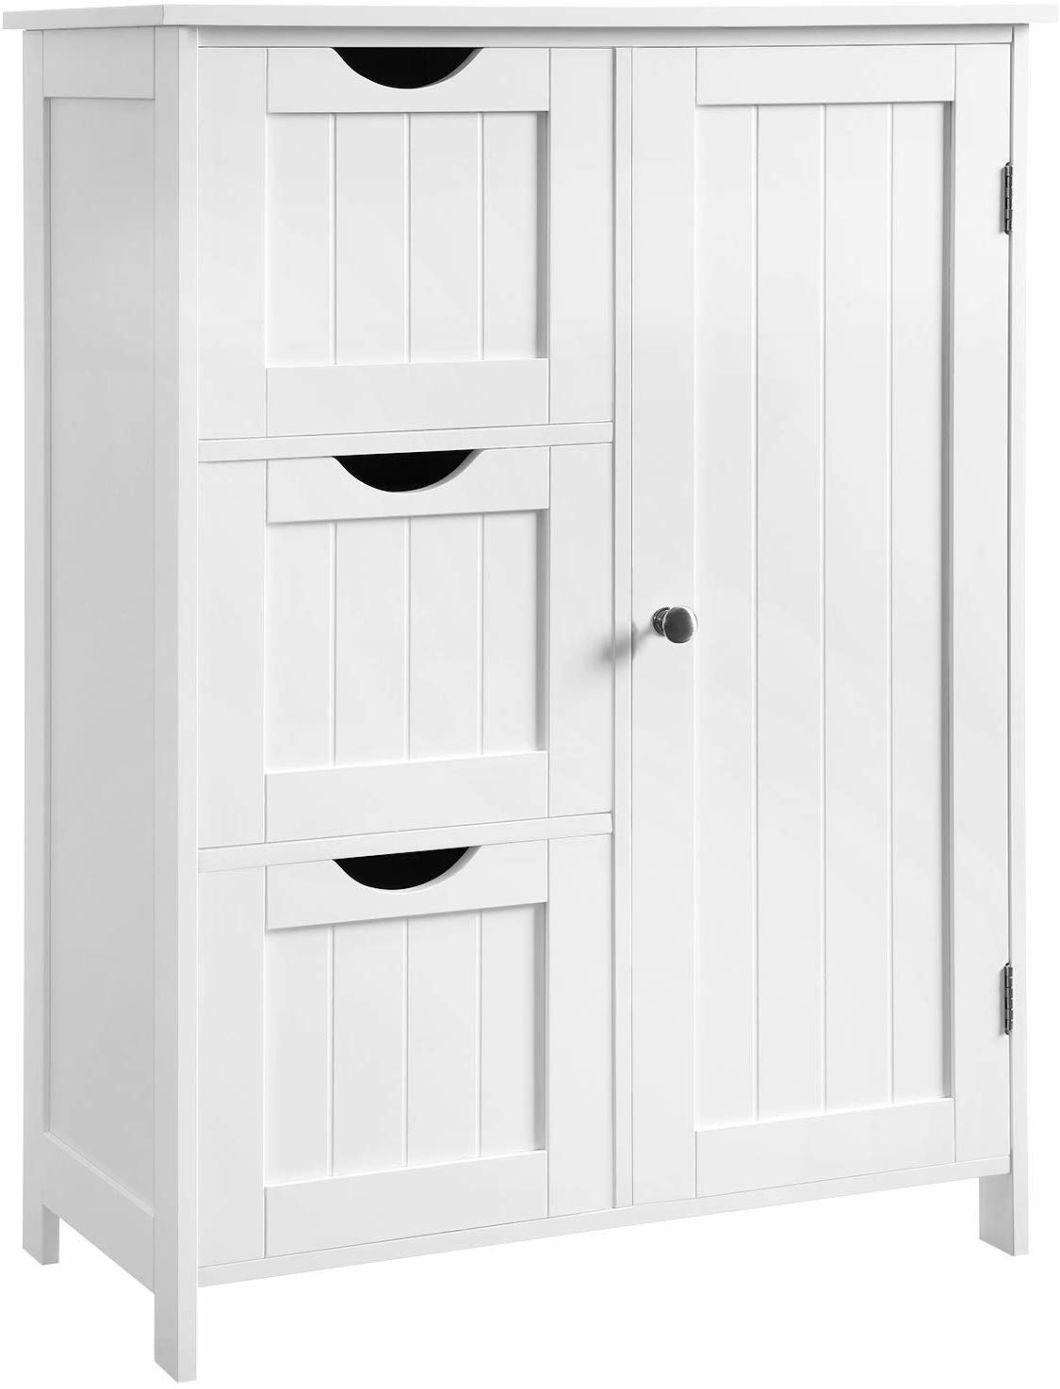 Home Furniture White Bathroom Storage Cabinet Living Furniture with 3 Large Drawers and 1 Adjustable Shelf